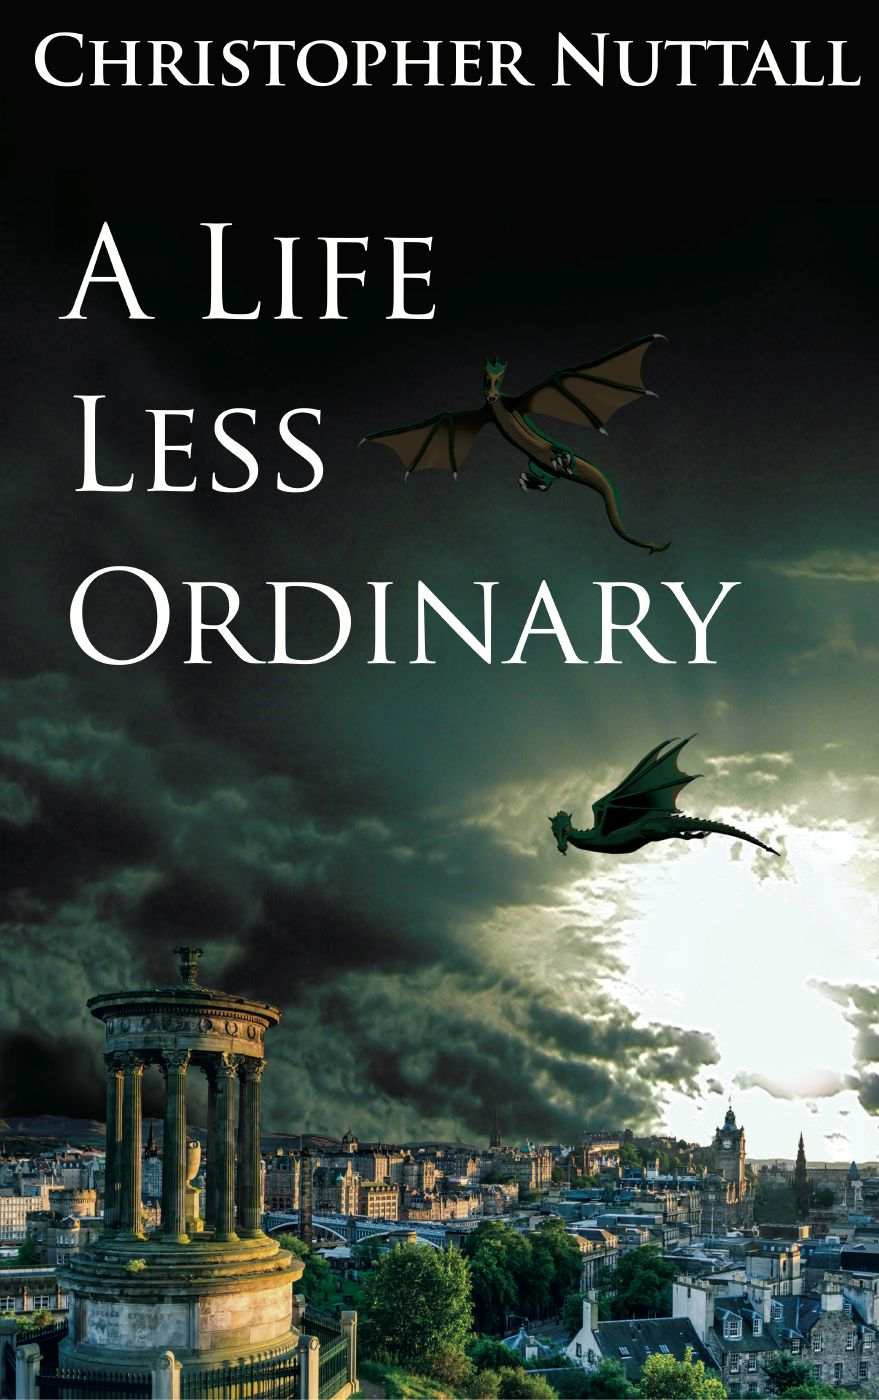 A Life Less Ordinary by Christopher Nuttall